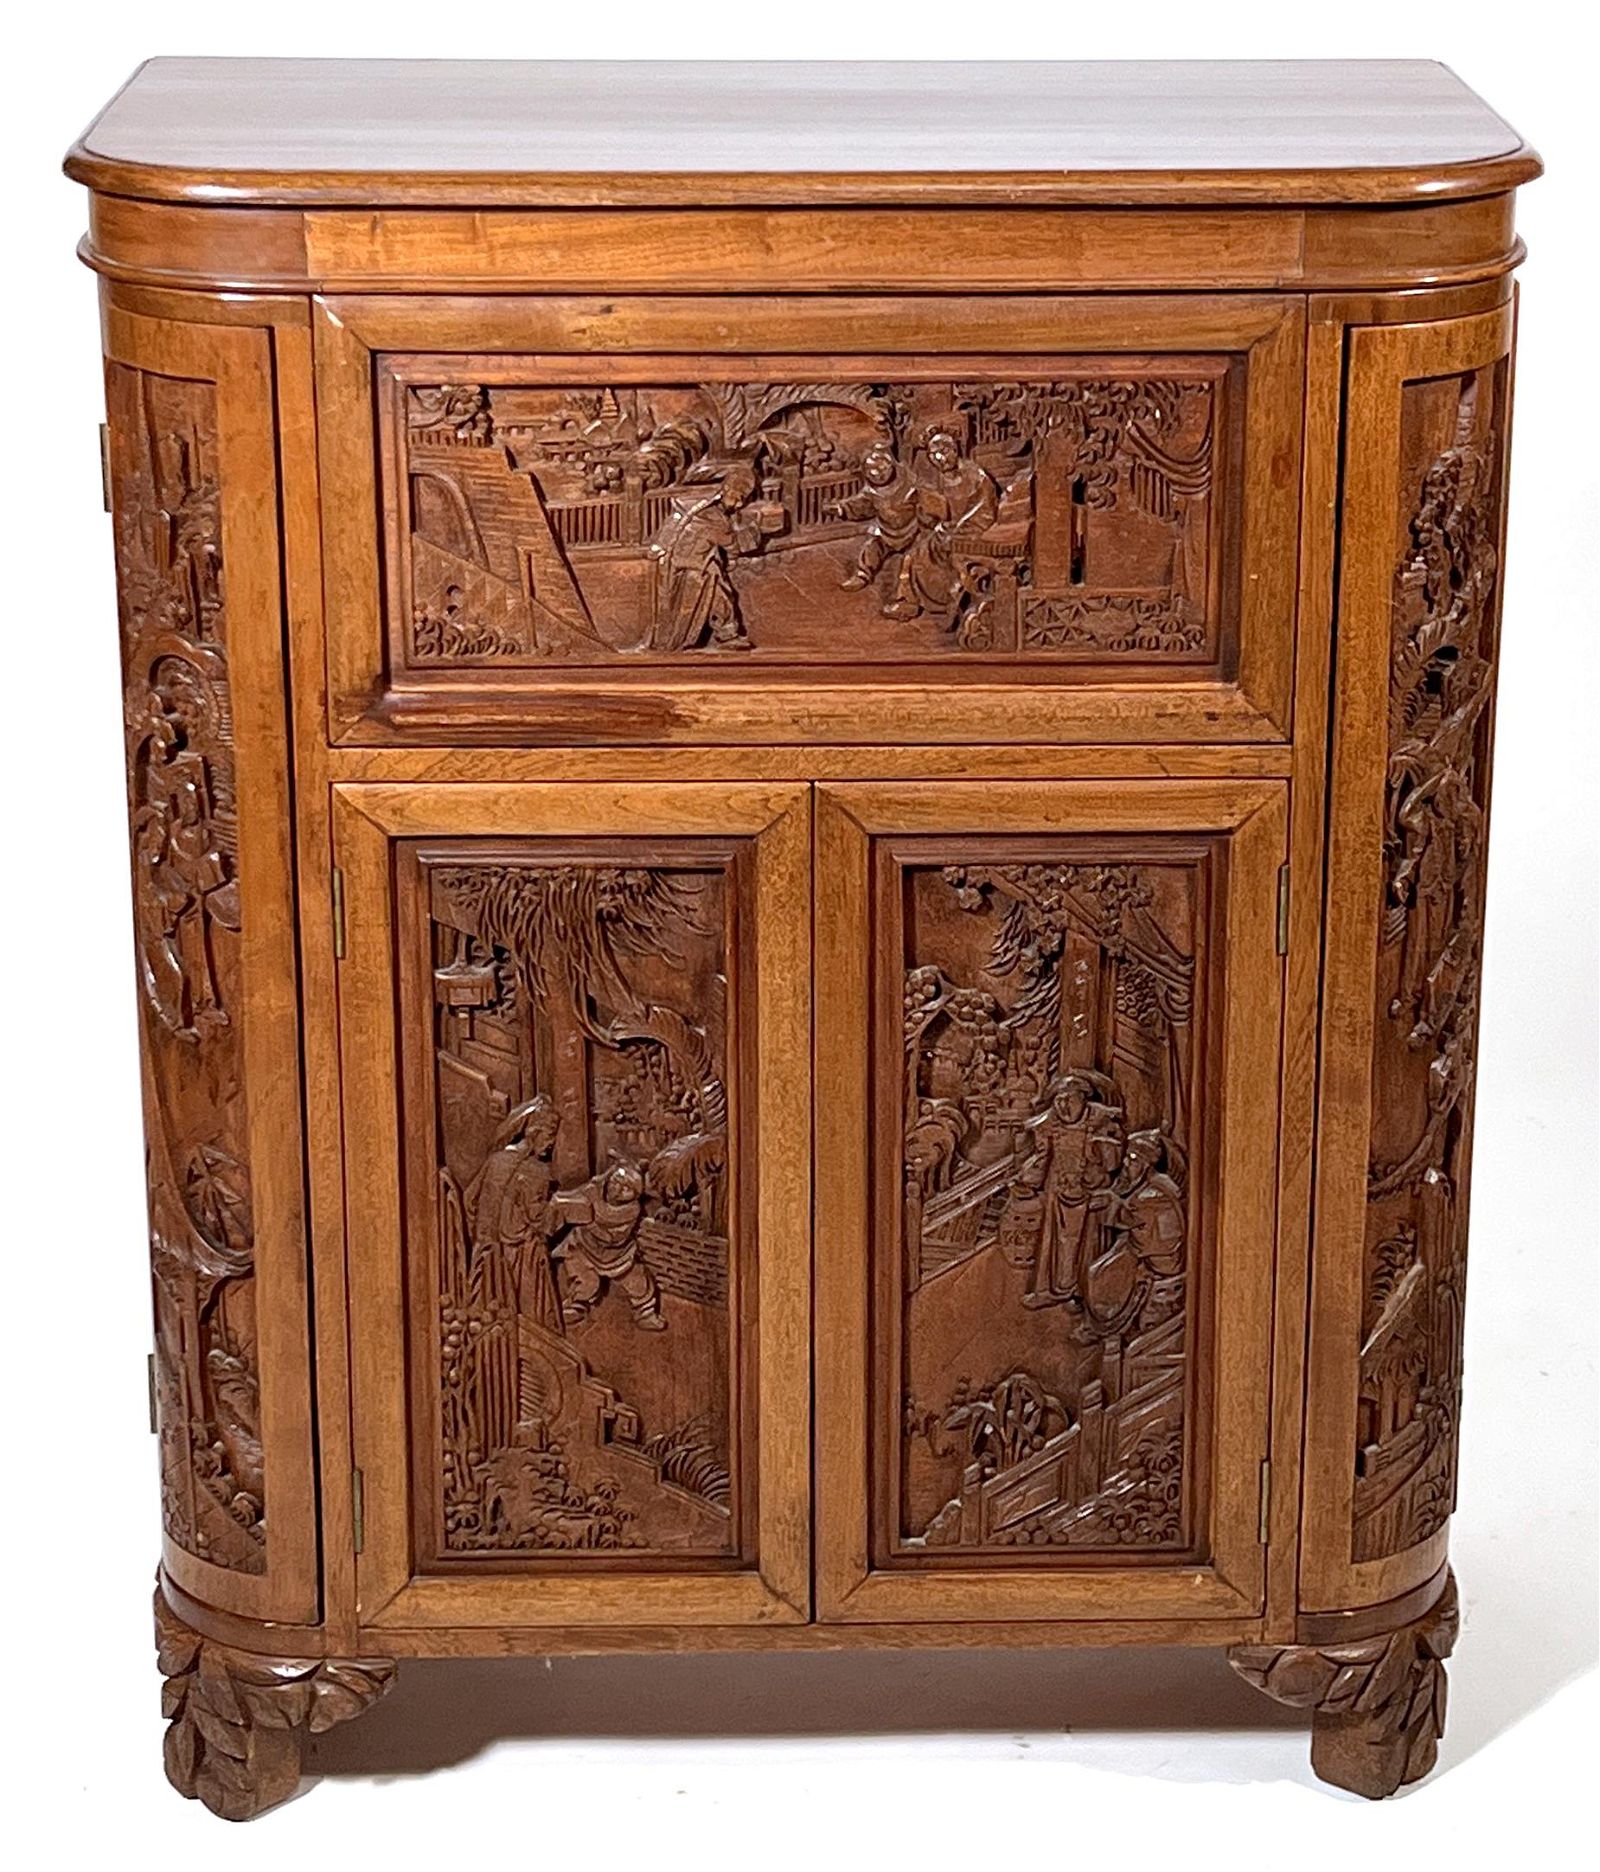 HANNA HOUSE CARVED CHINESE LIFT 3d22a2